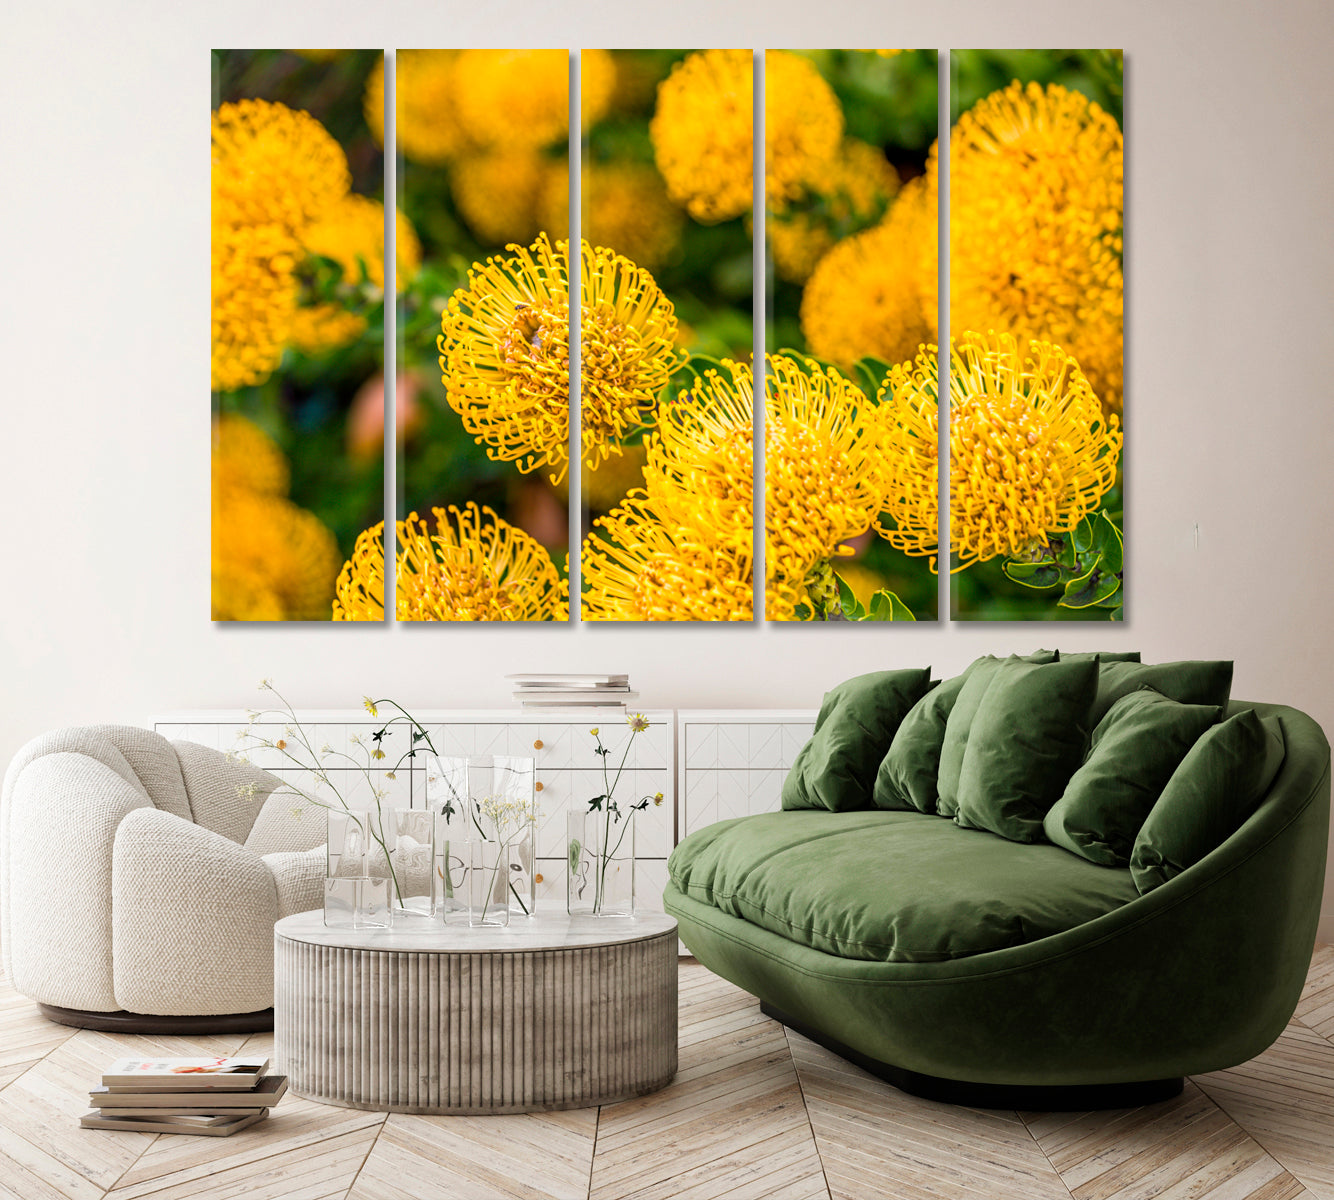 Yellow Protea Flowers Canvas Print ArtLexy 5 Panels 36"x24" inches 